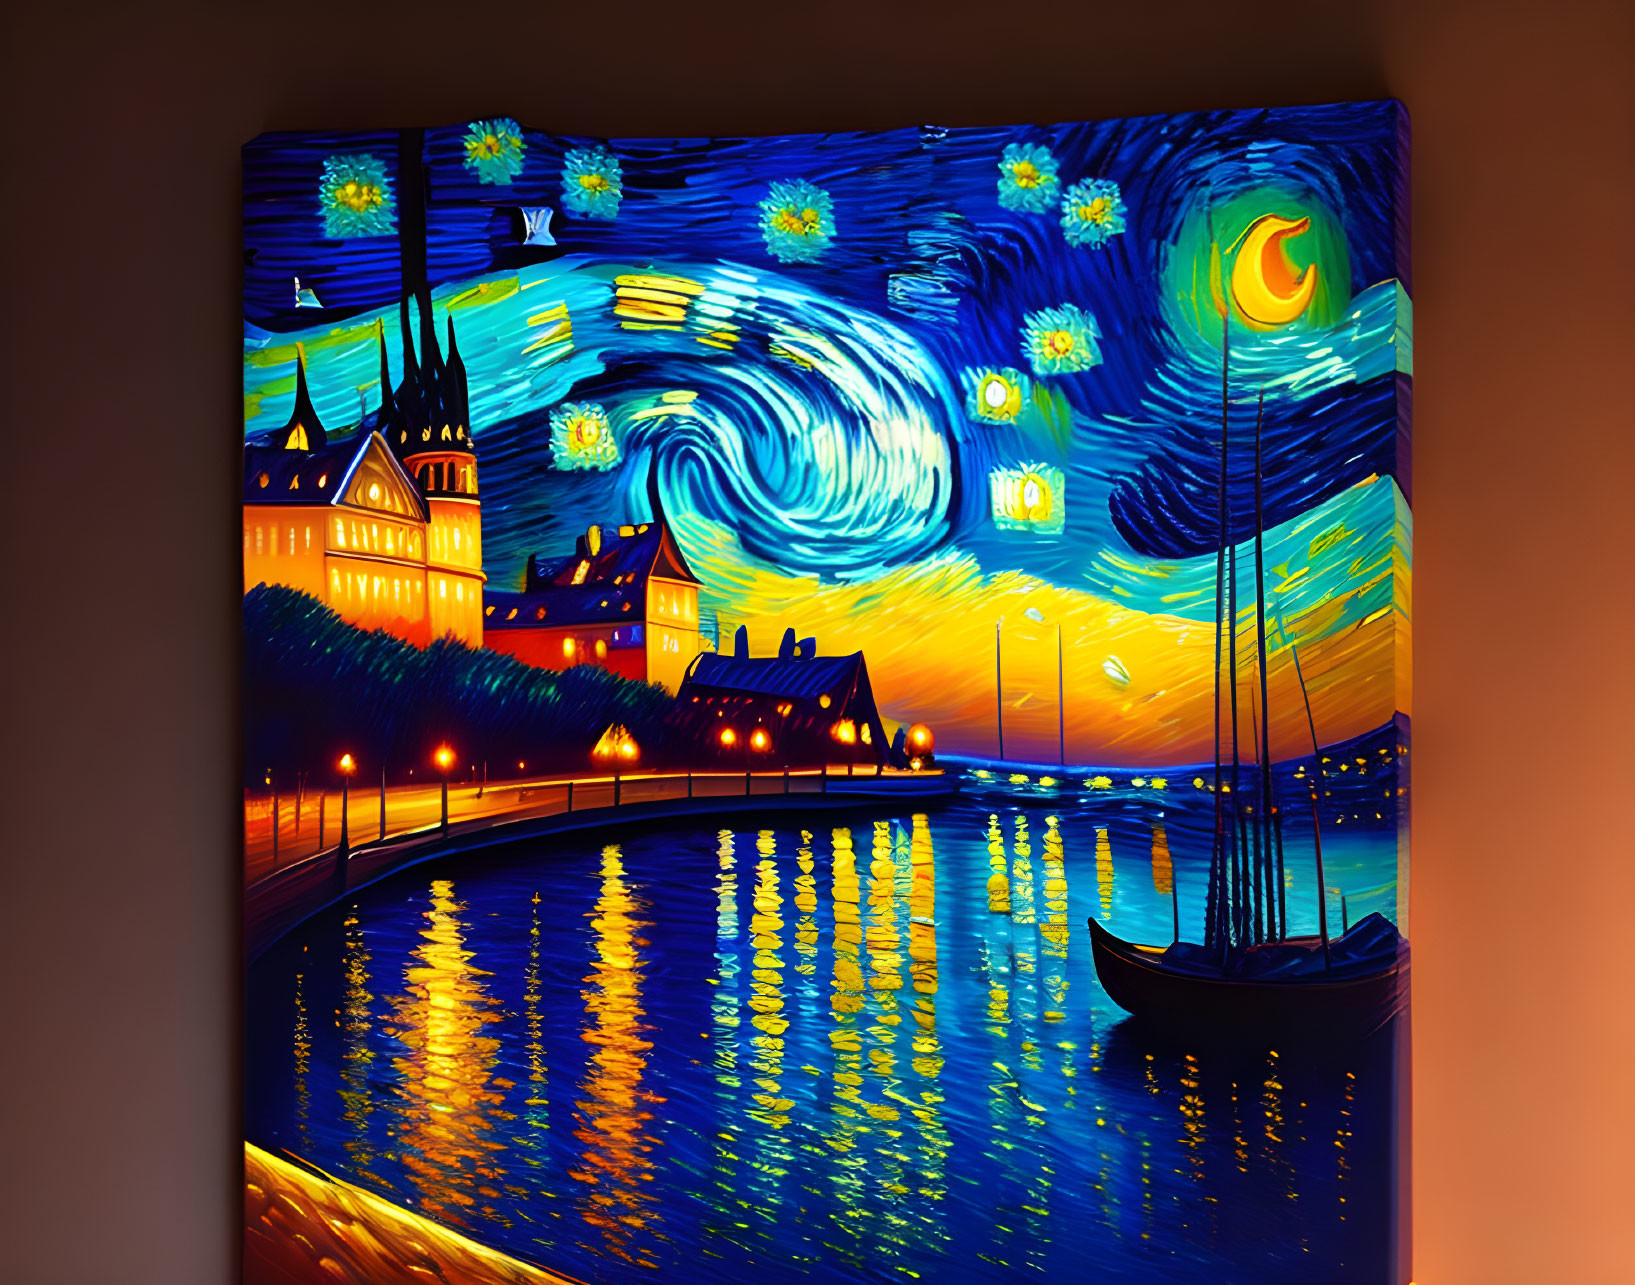 Colorful painting of swirling night sky over river and town with boat